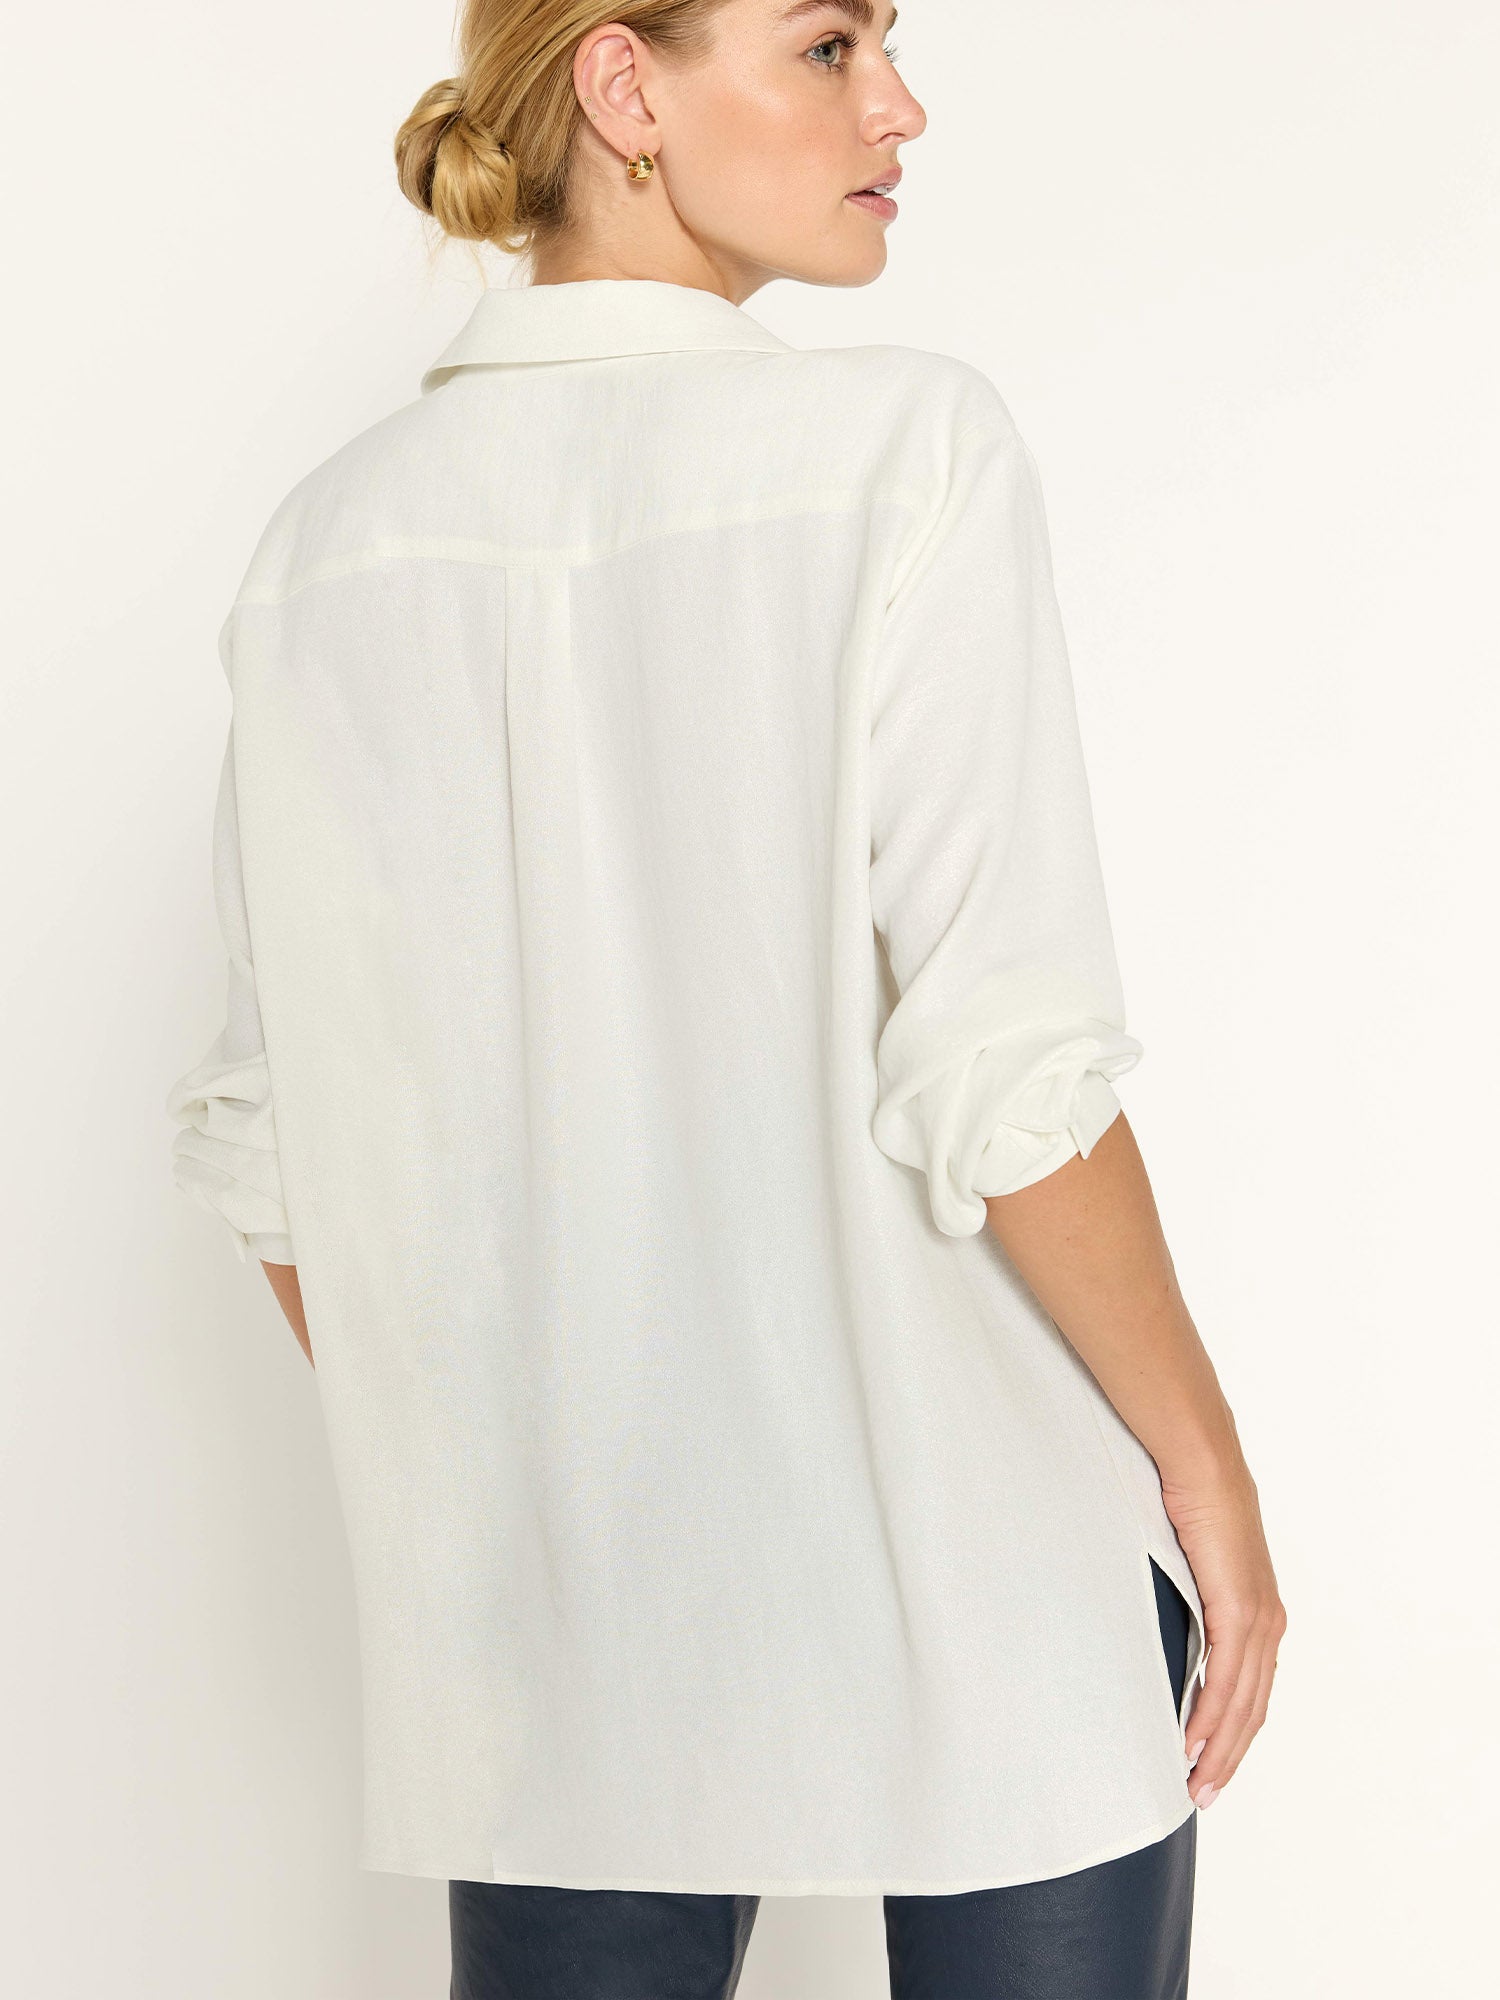 River button up white shirt back view